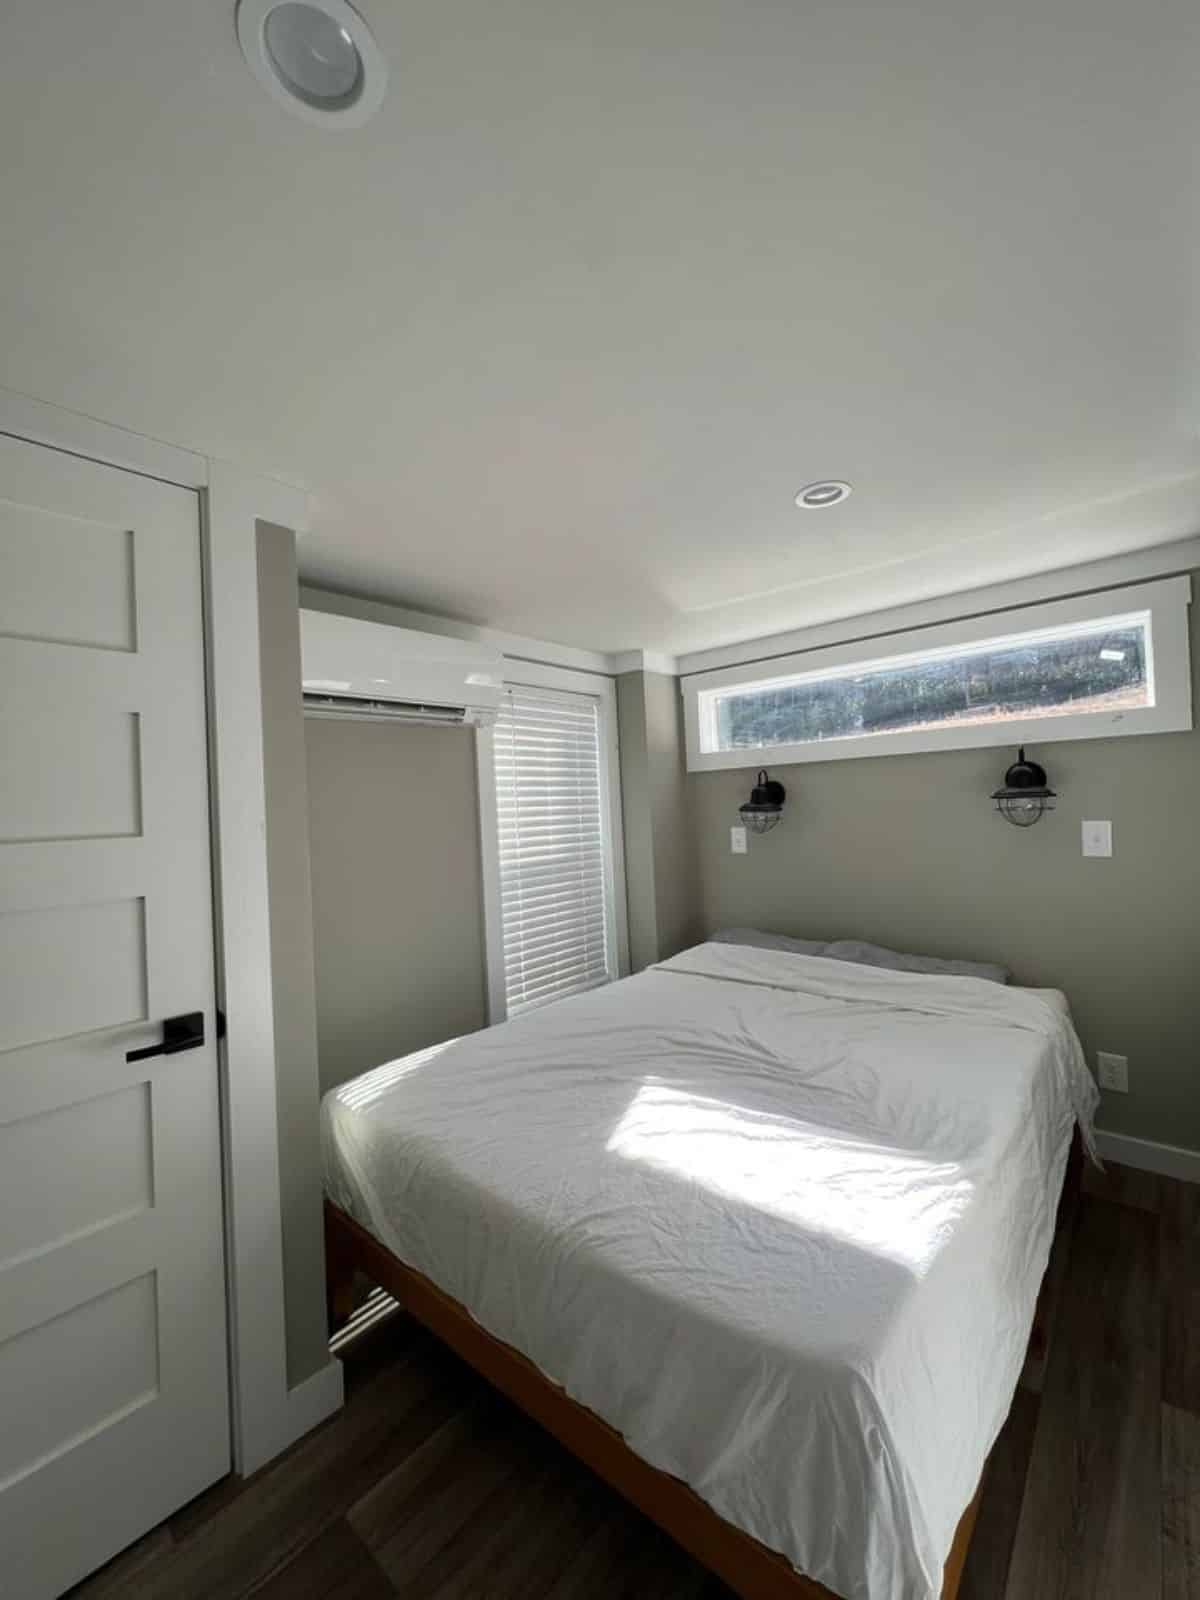 bedroom of park model tiny home has a comfortable bed